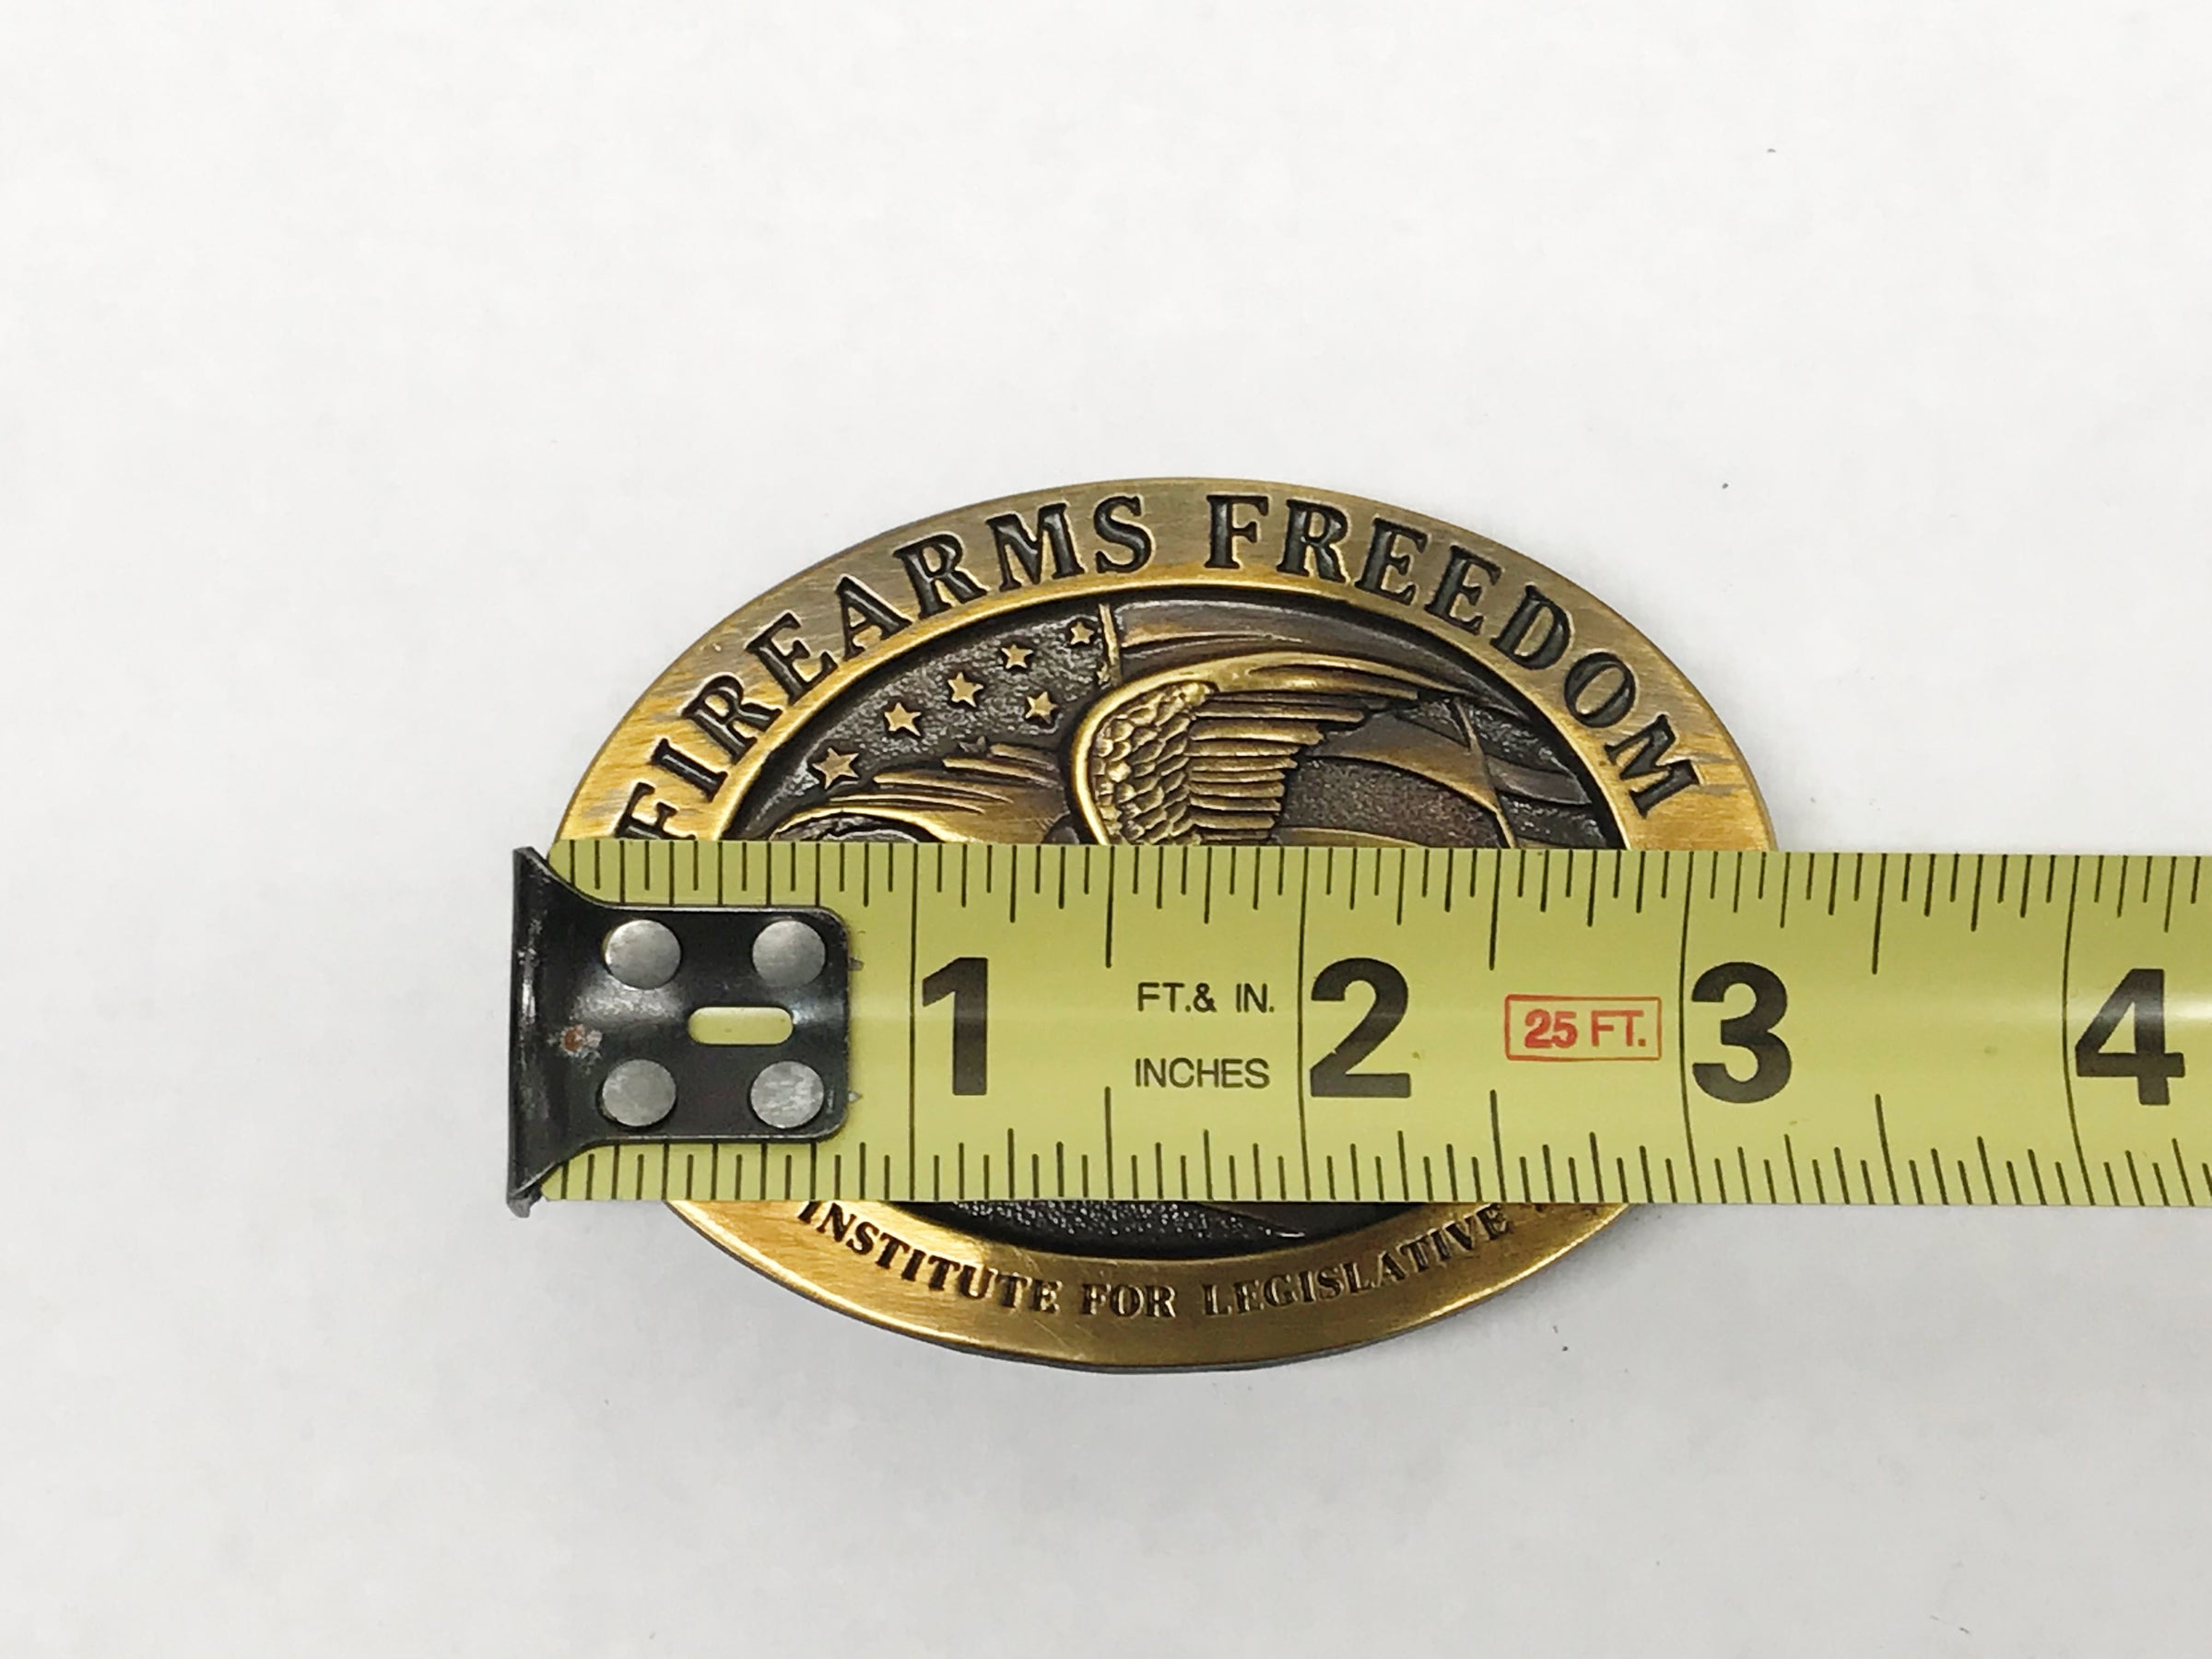 www.hersandhistreasures.com/products/firearms-freedom-nra-institute-for-legislative-action-brass-belt-buckle-usa